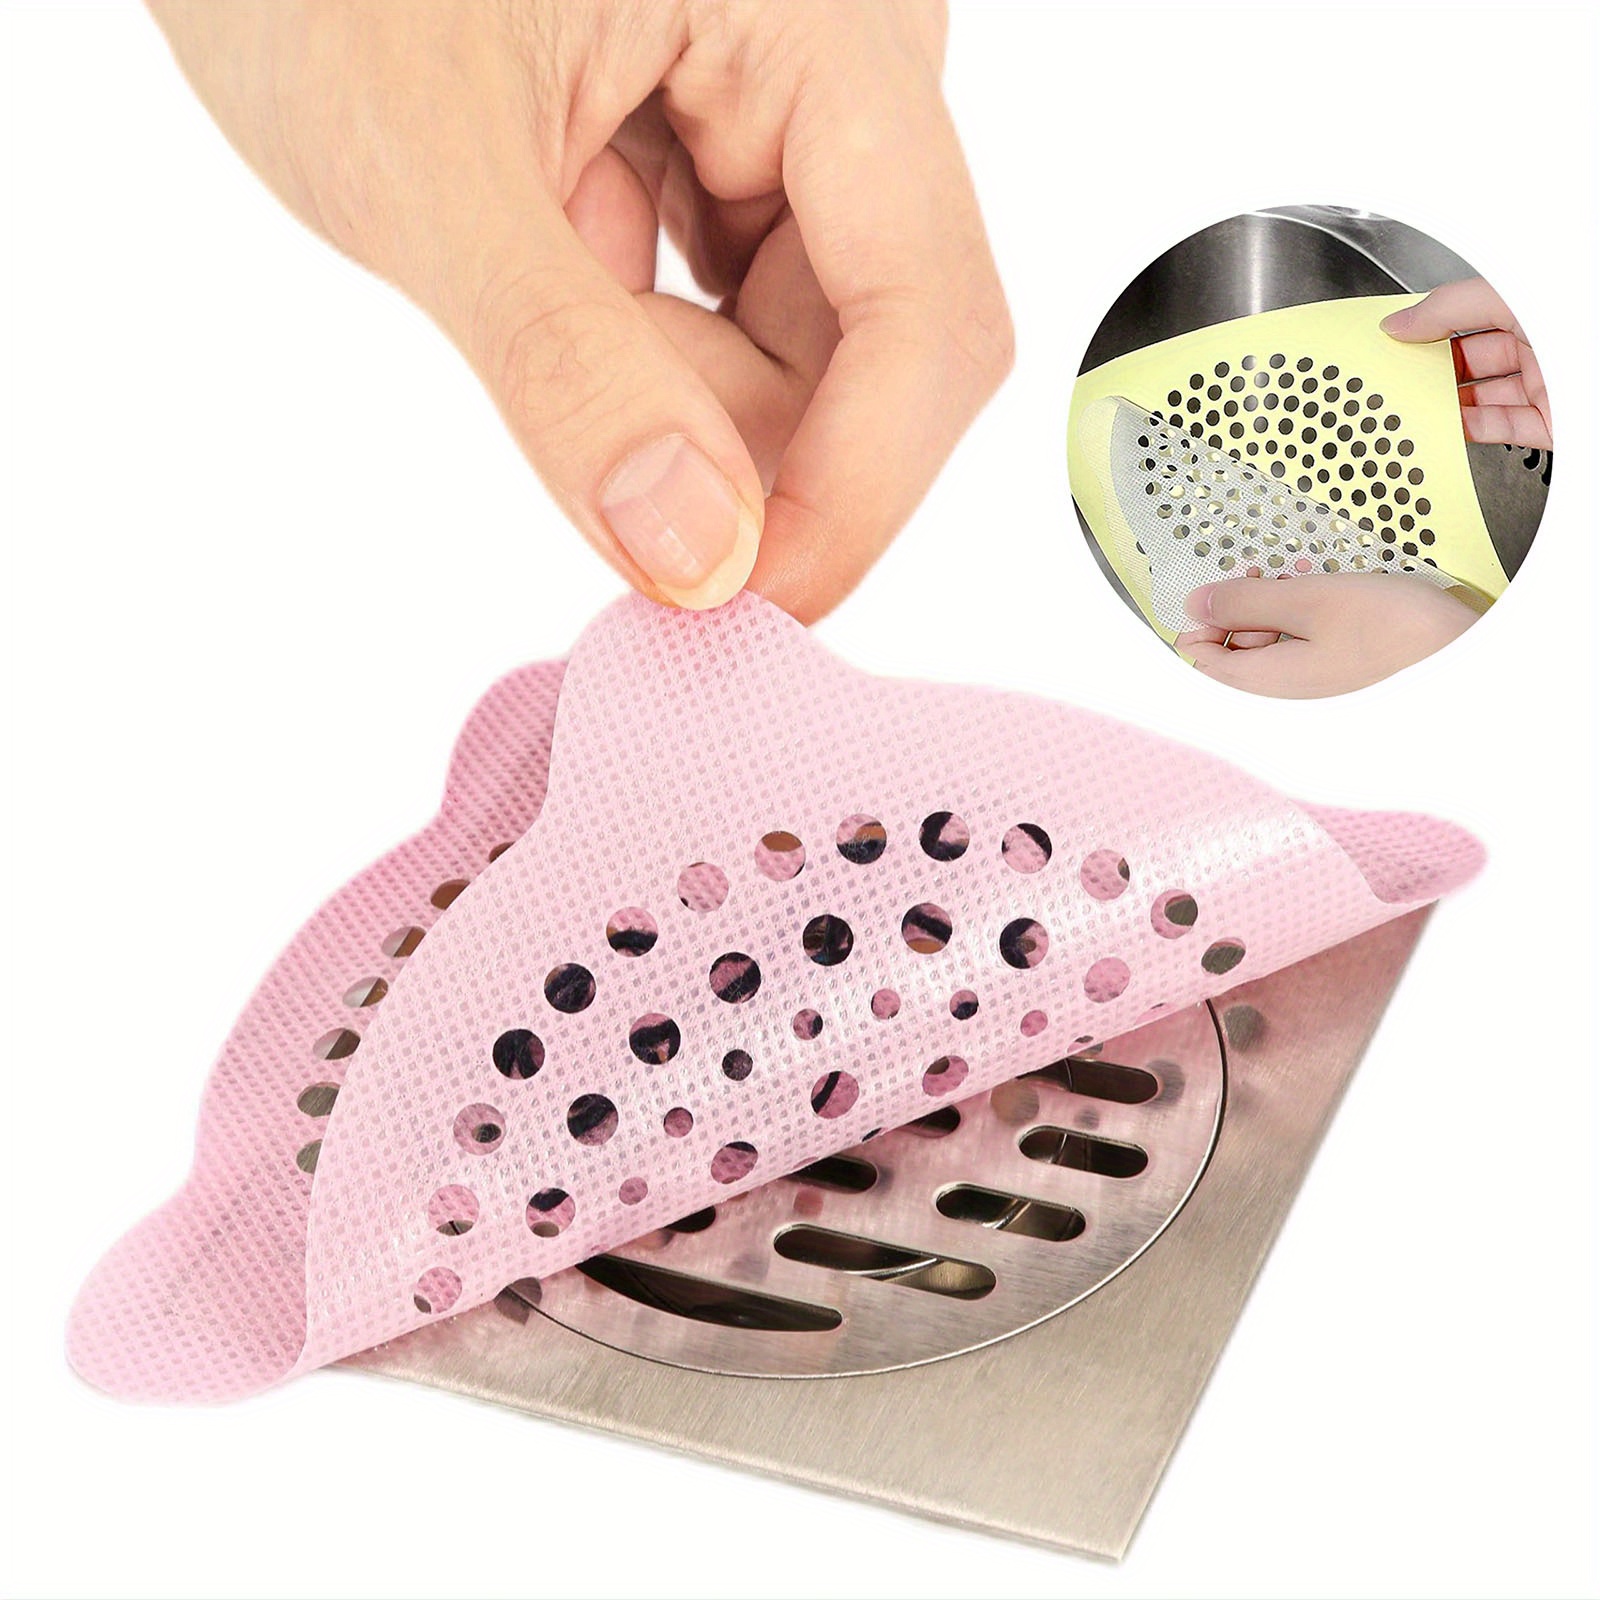 Disposable Shower Drain Hair Catcher Mesh Stickers, Bathroom Drain Hair  Catcher/Bathtub Drain Cover/Flat Shower Drain Screen Cover - Dog Hair  Catcher for Shower to Catch Hair (30) 